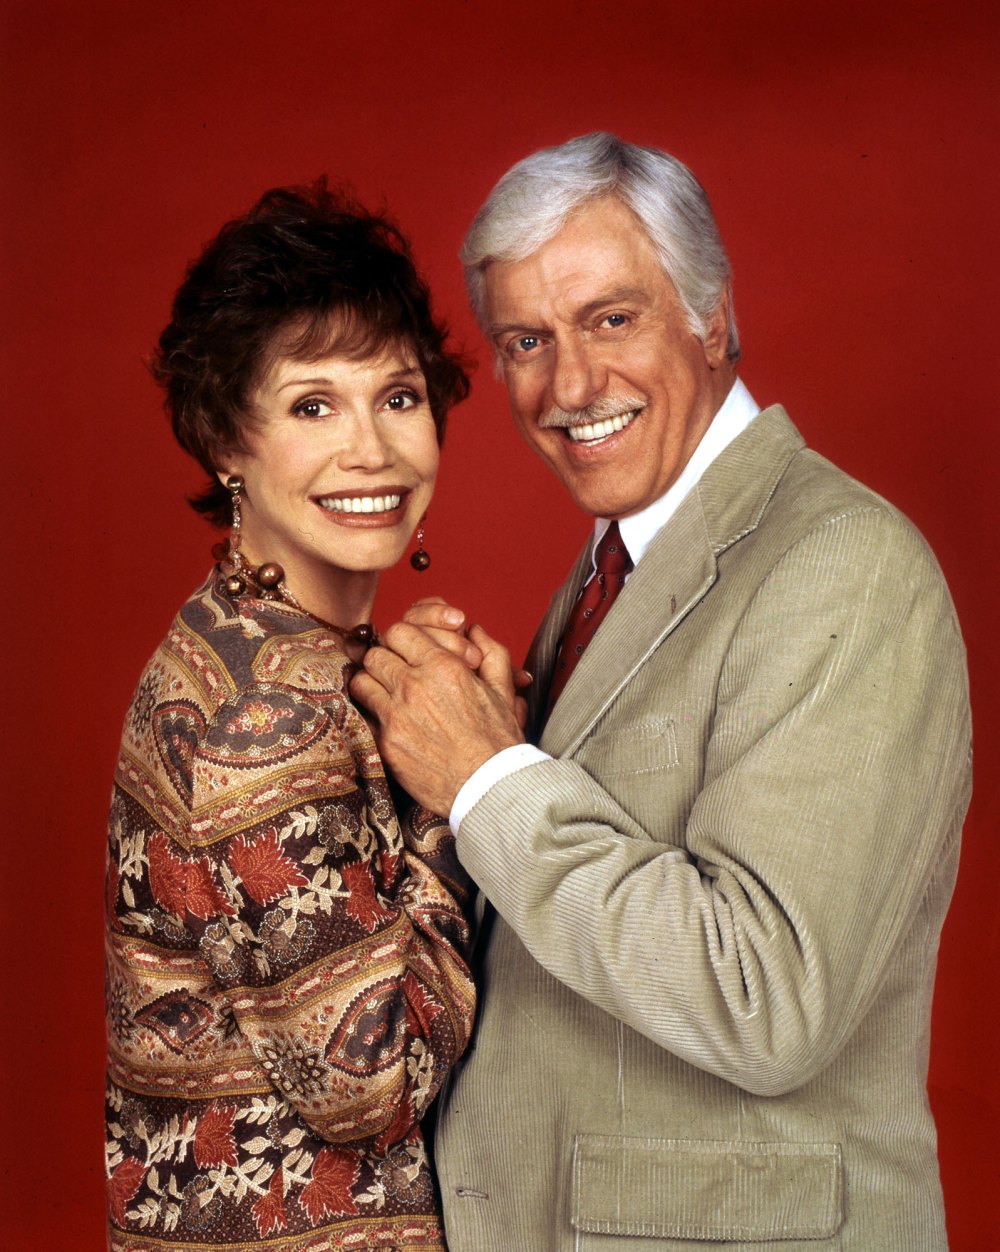 Dick Van Dyke Presents Mary Tyler Moore With Lifetime Achievement Award